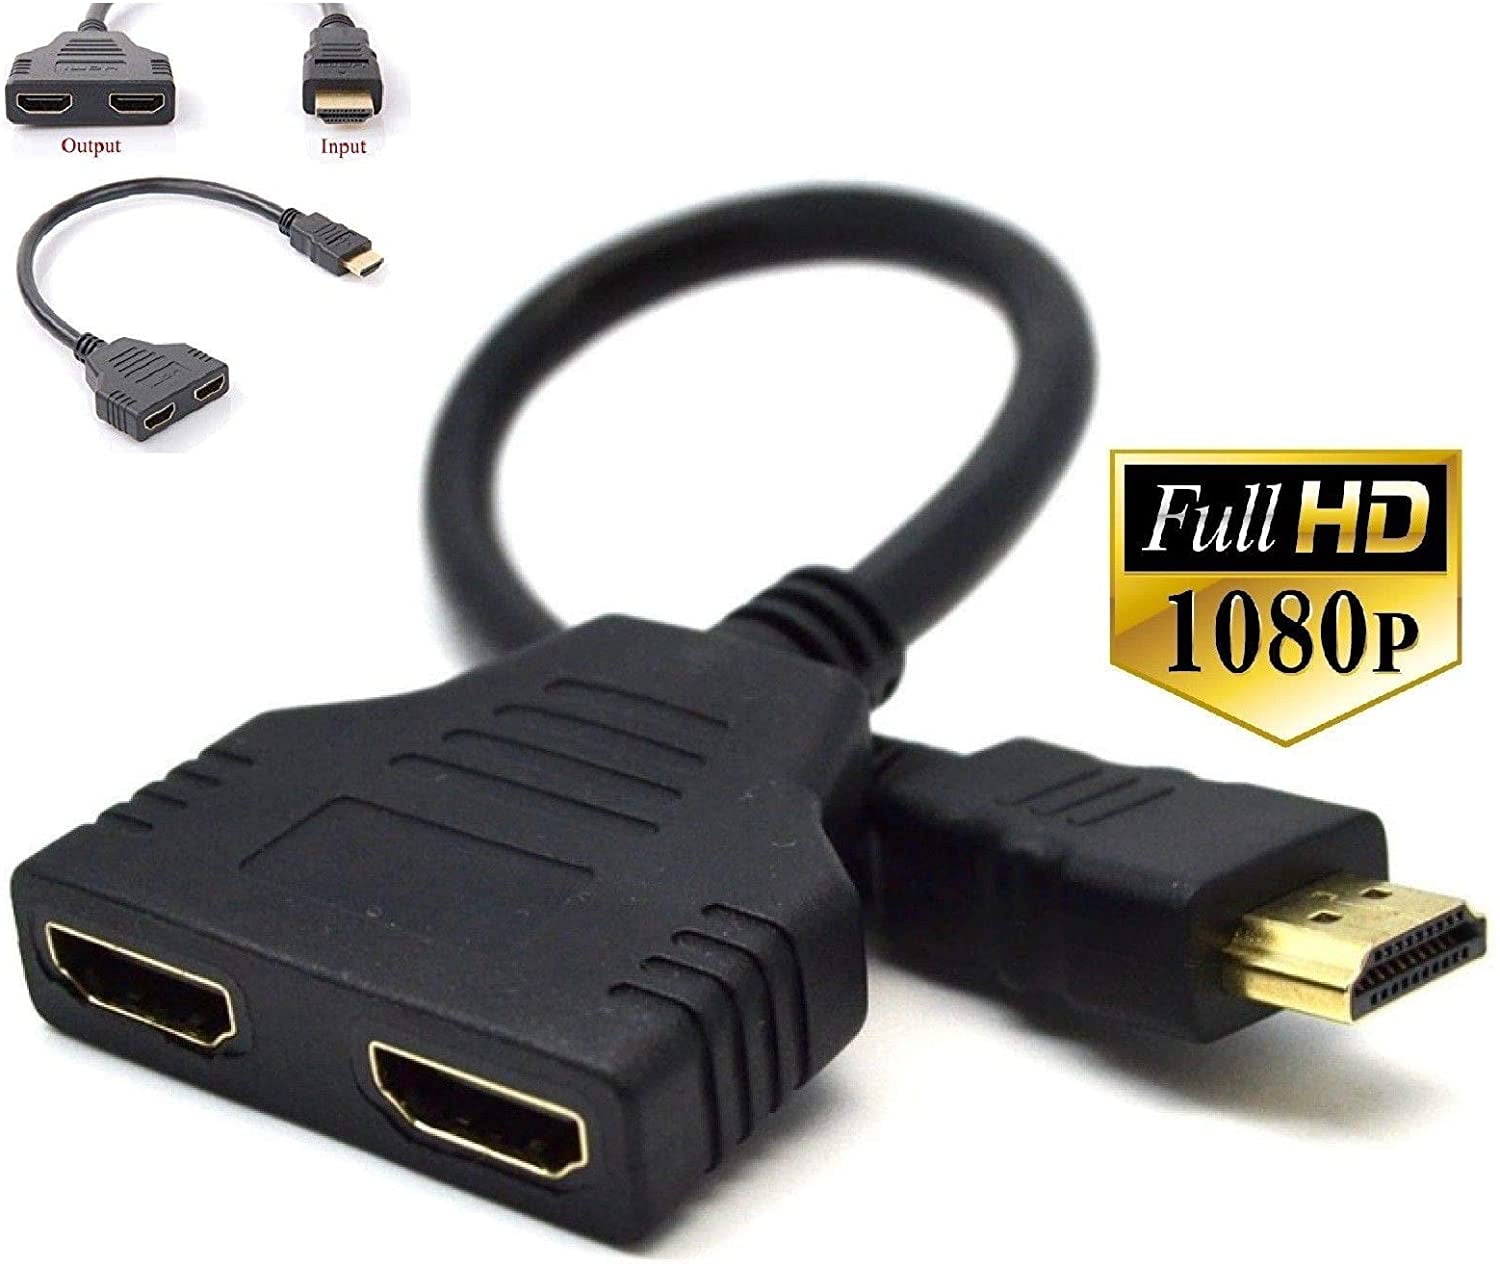 B2G1 Free 1" HDMI 1.4 Cable Adapter Male to Male for 4K 3D 1080p TV LCD HDTV